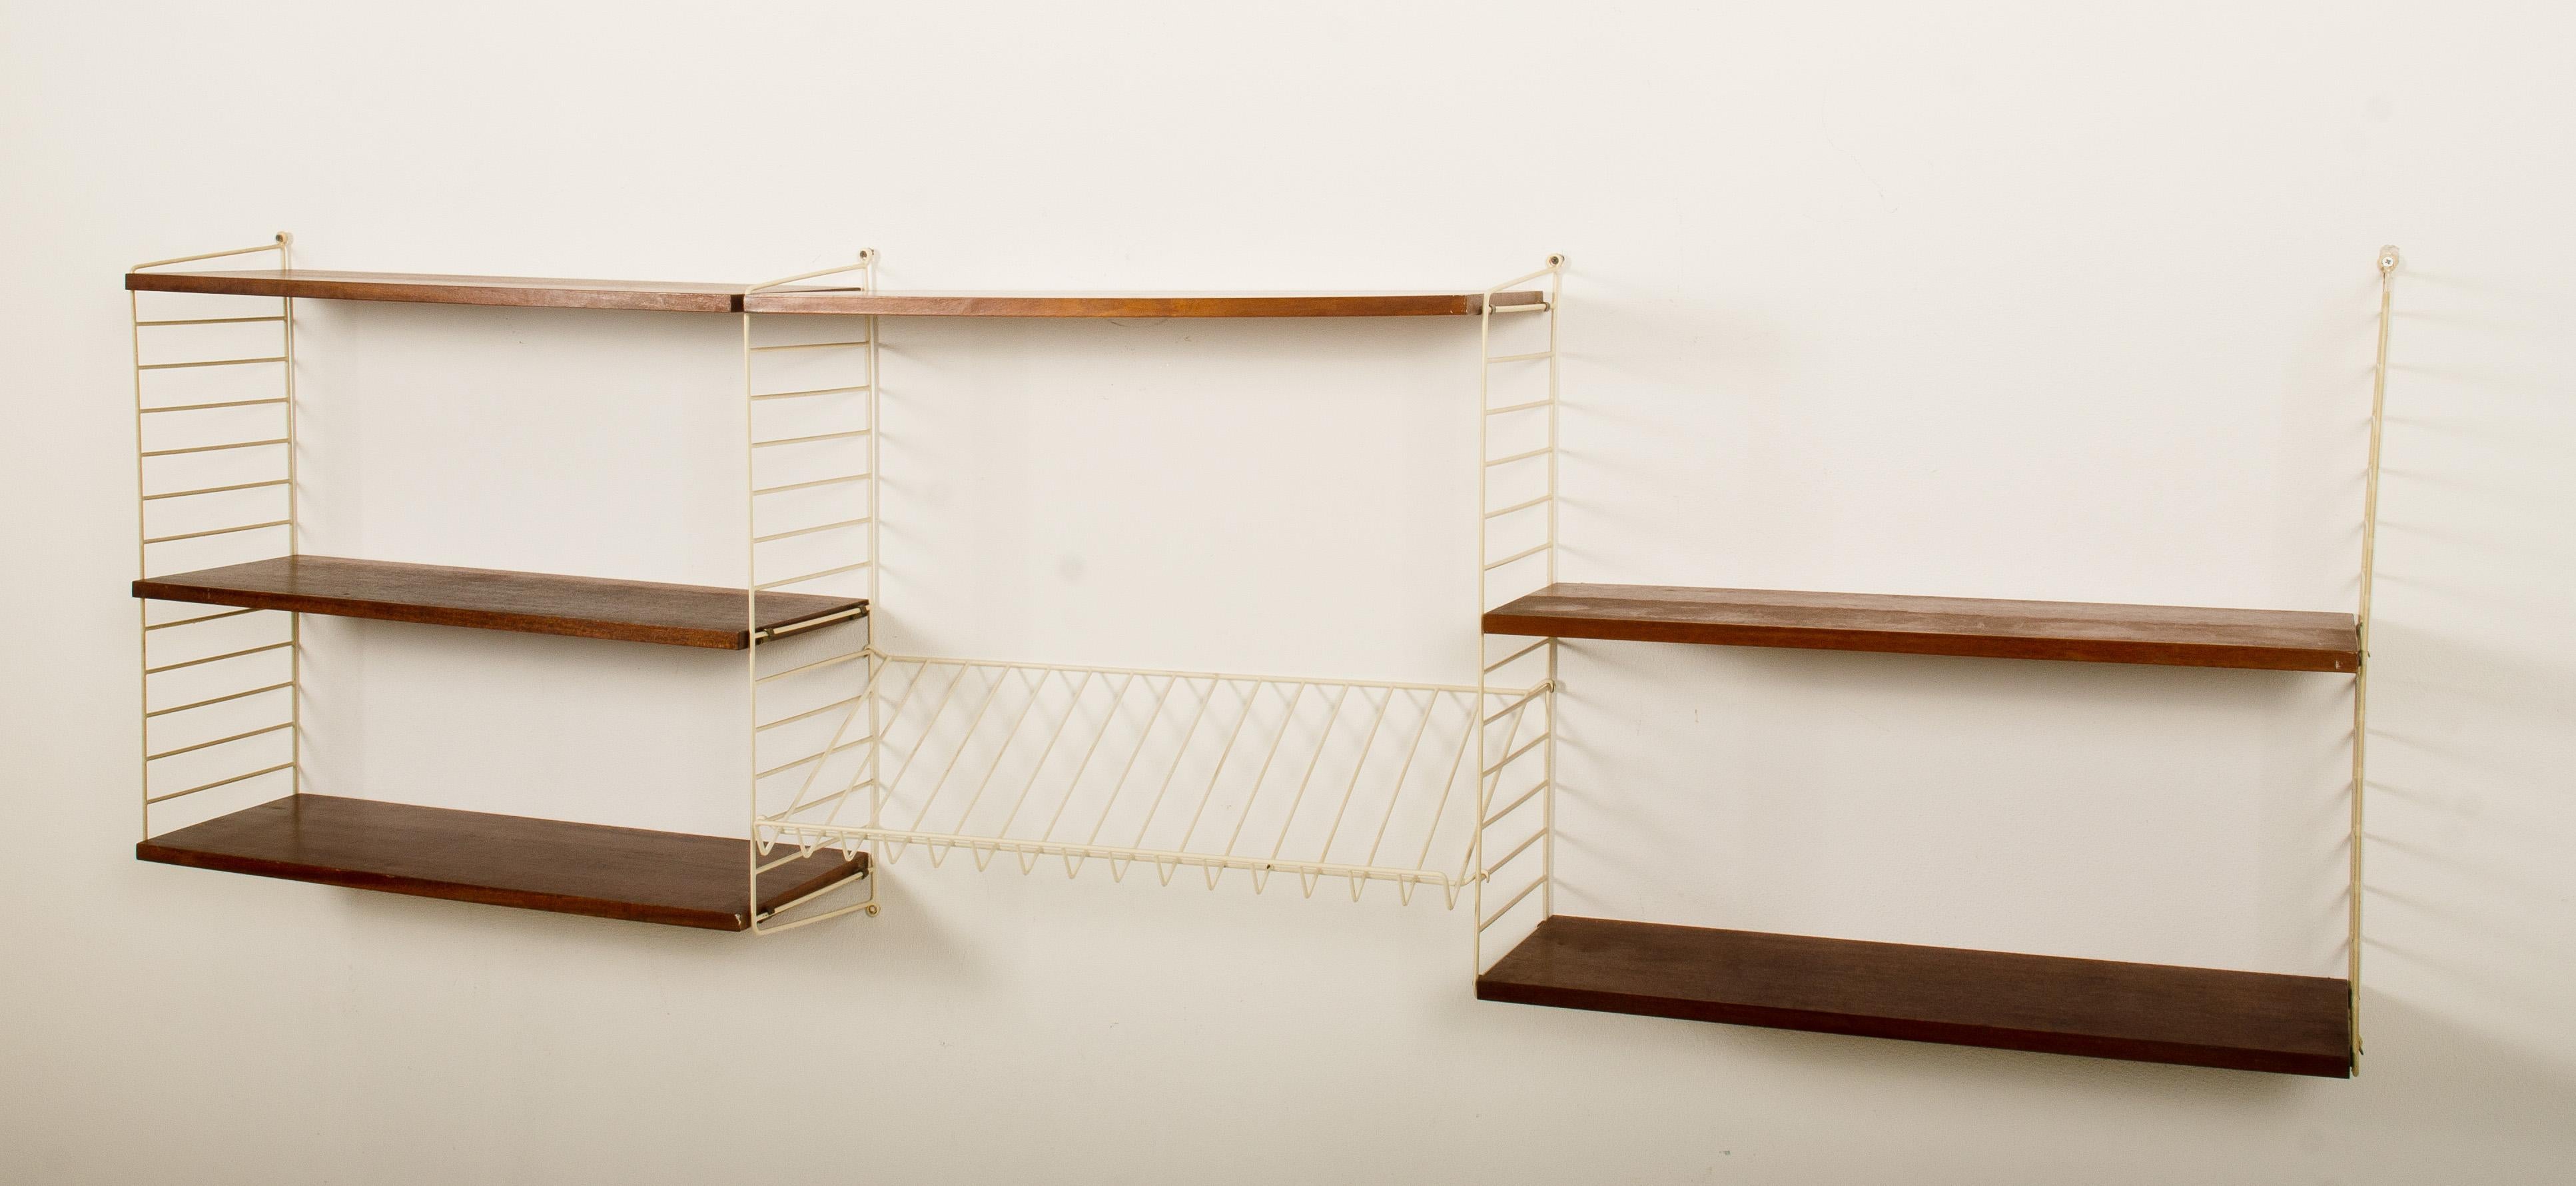 Modular String Wall Unit in Teak by Nisse Strinning For Sale 10